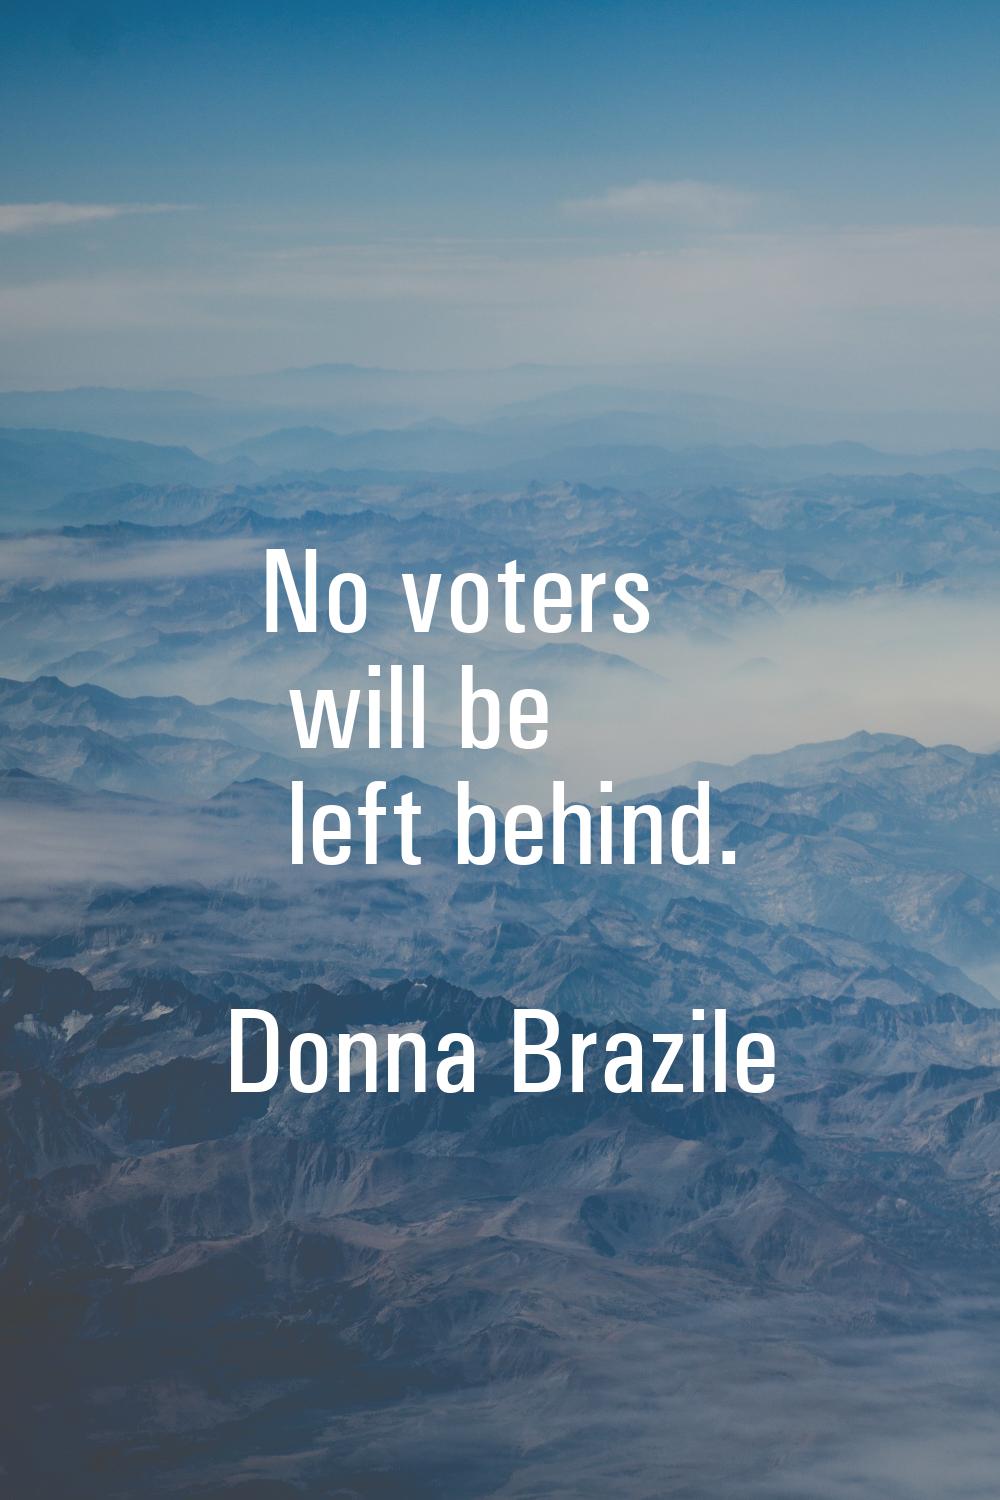 No voters will be left behind.